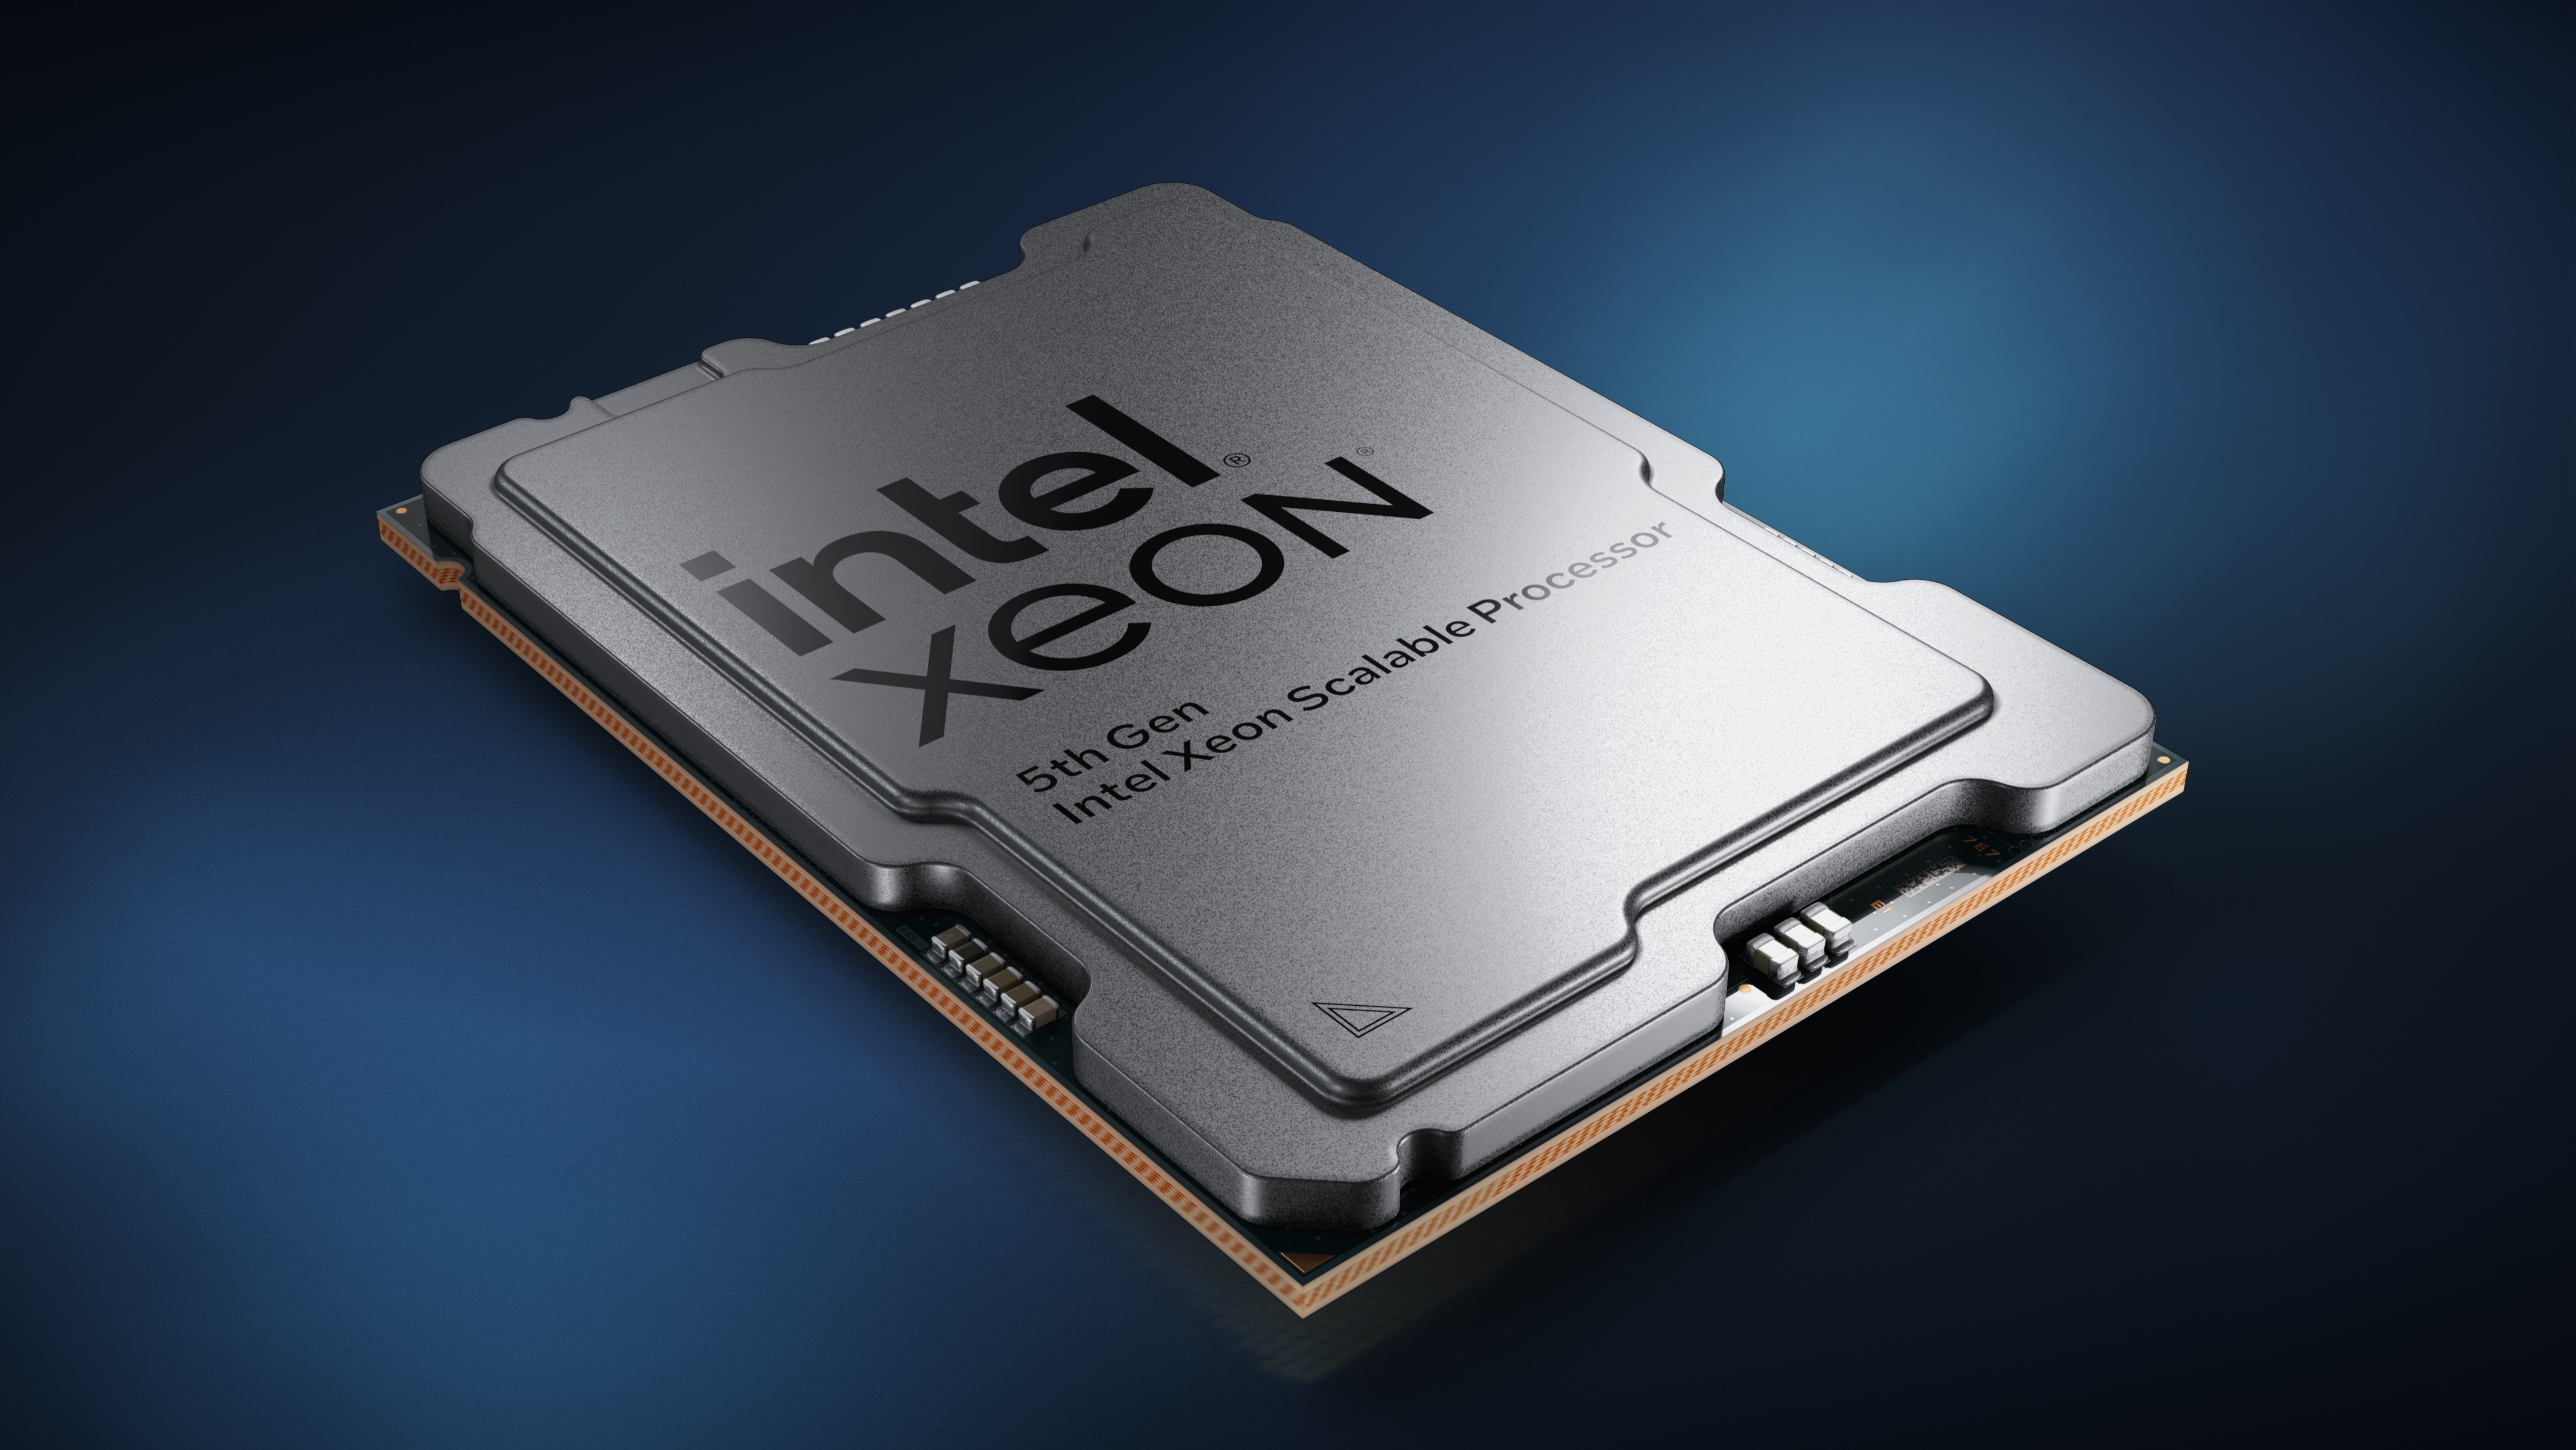 Intel's new workstation chips look to smash AMD's Threadripper, but Xeon W9-3595X refresh appears on Geekbench ... - Tom's Hardware